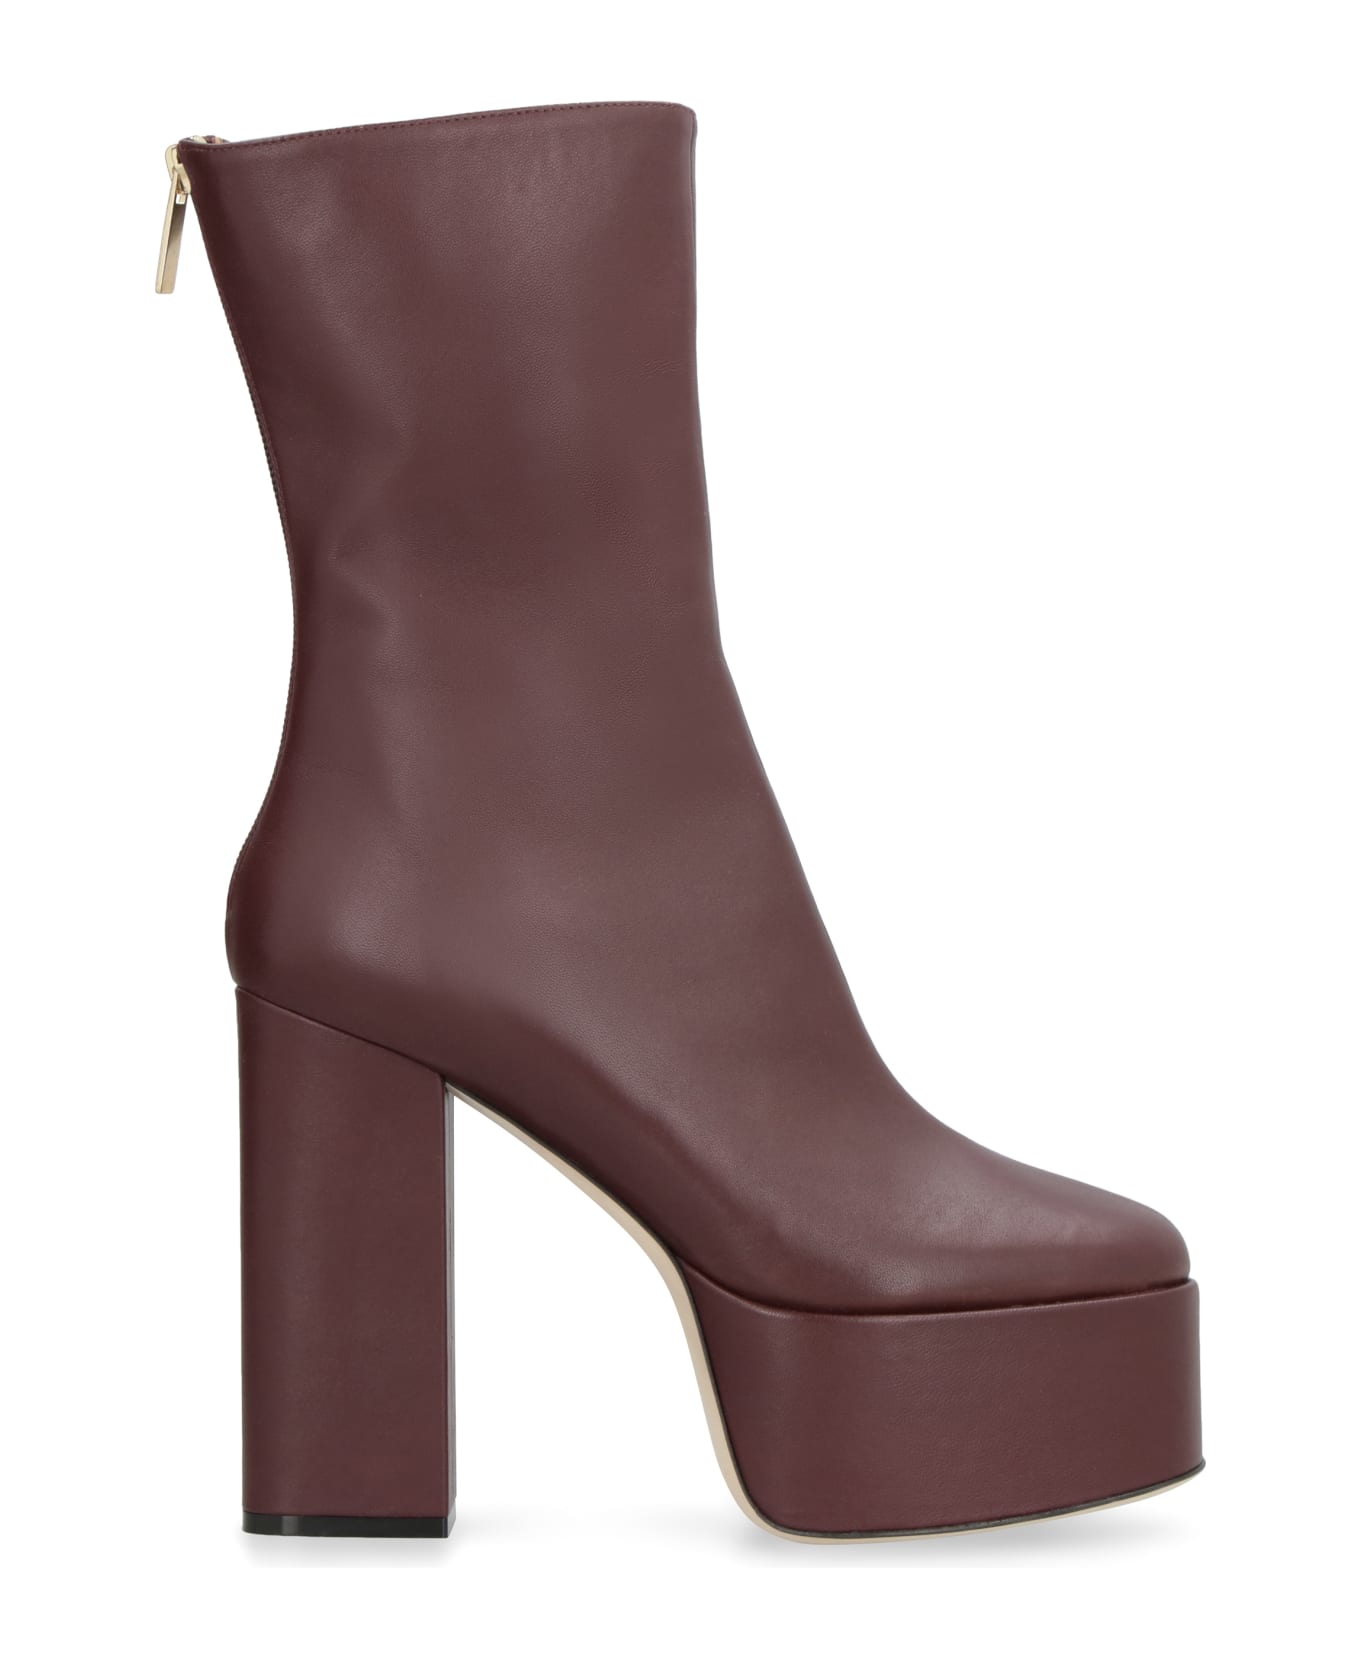 Paris Texas Lexy Leather Ankle Boots - Burgundy ブーツ